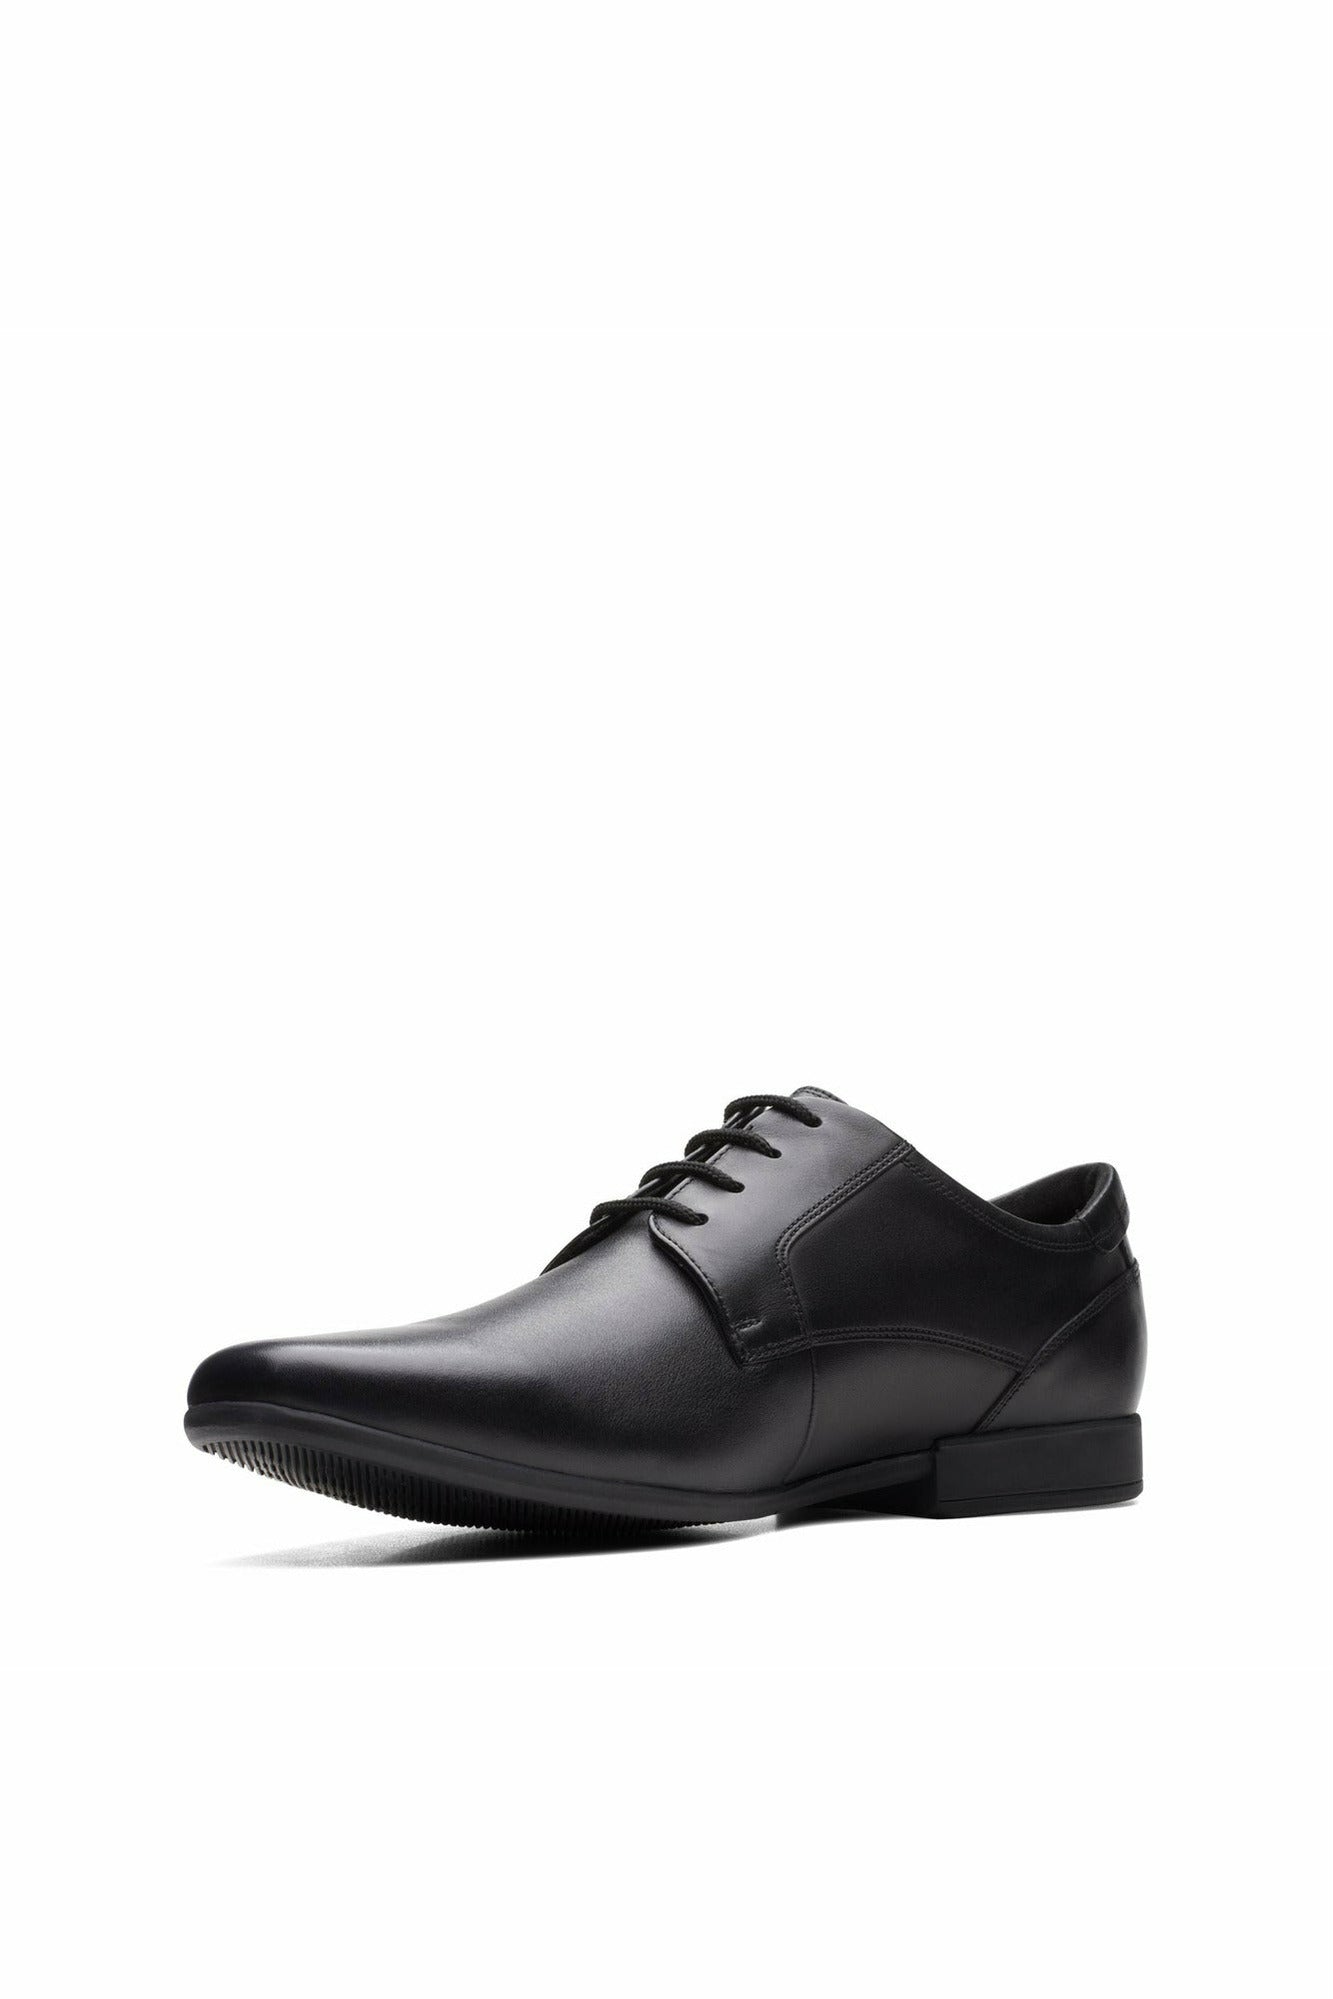 Clarks Sidton Lace in Black Leather